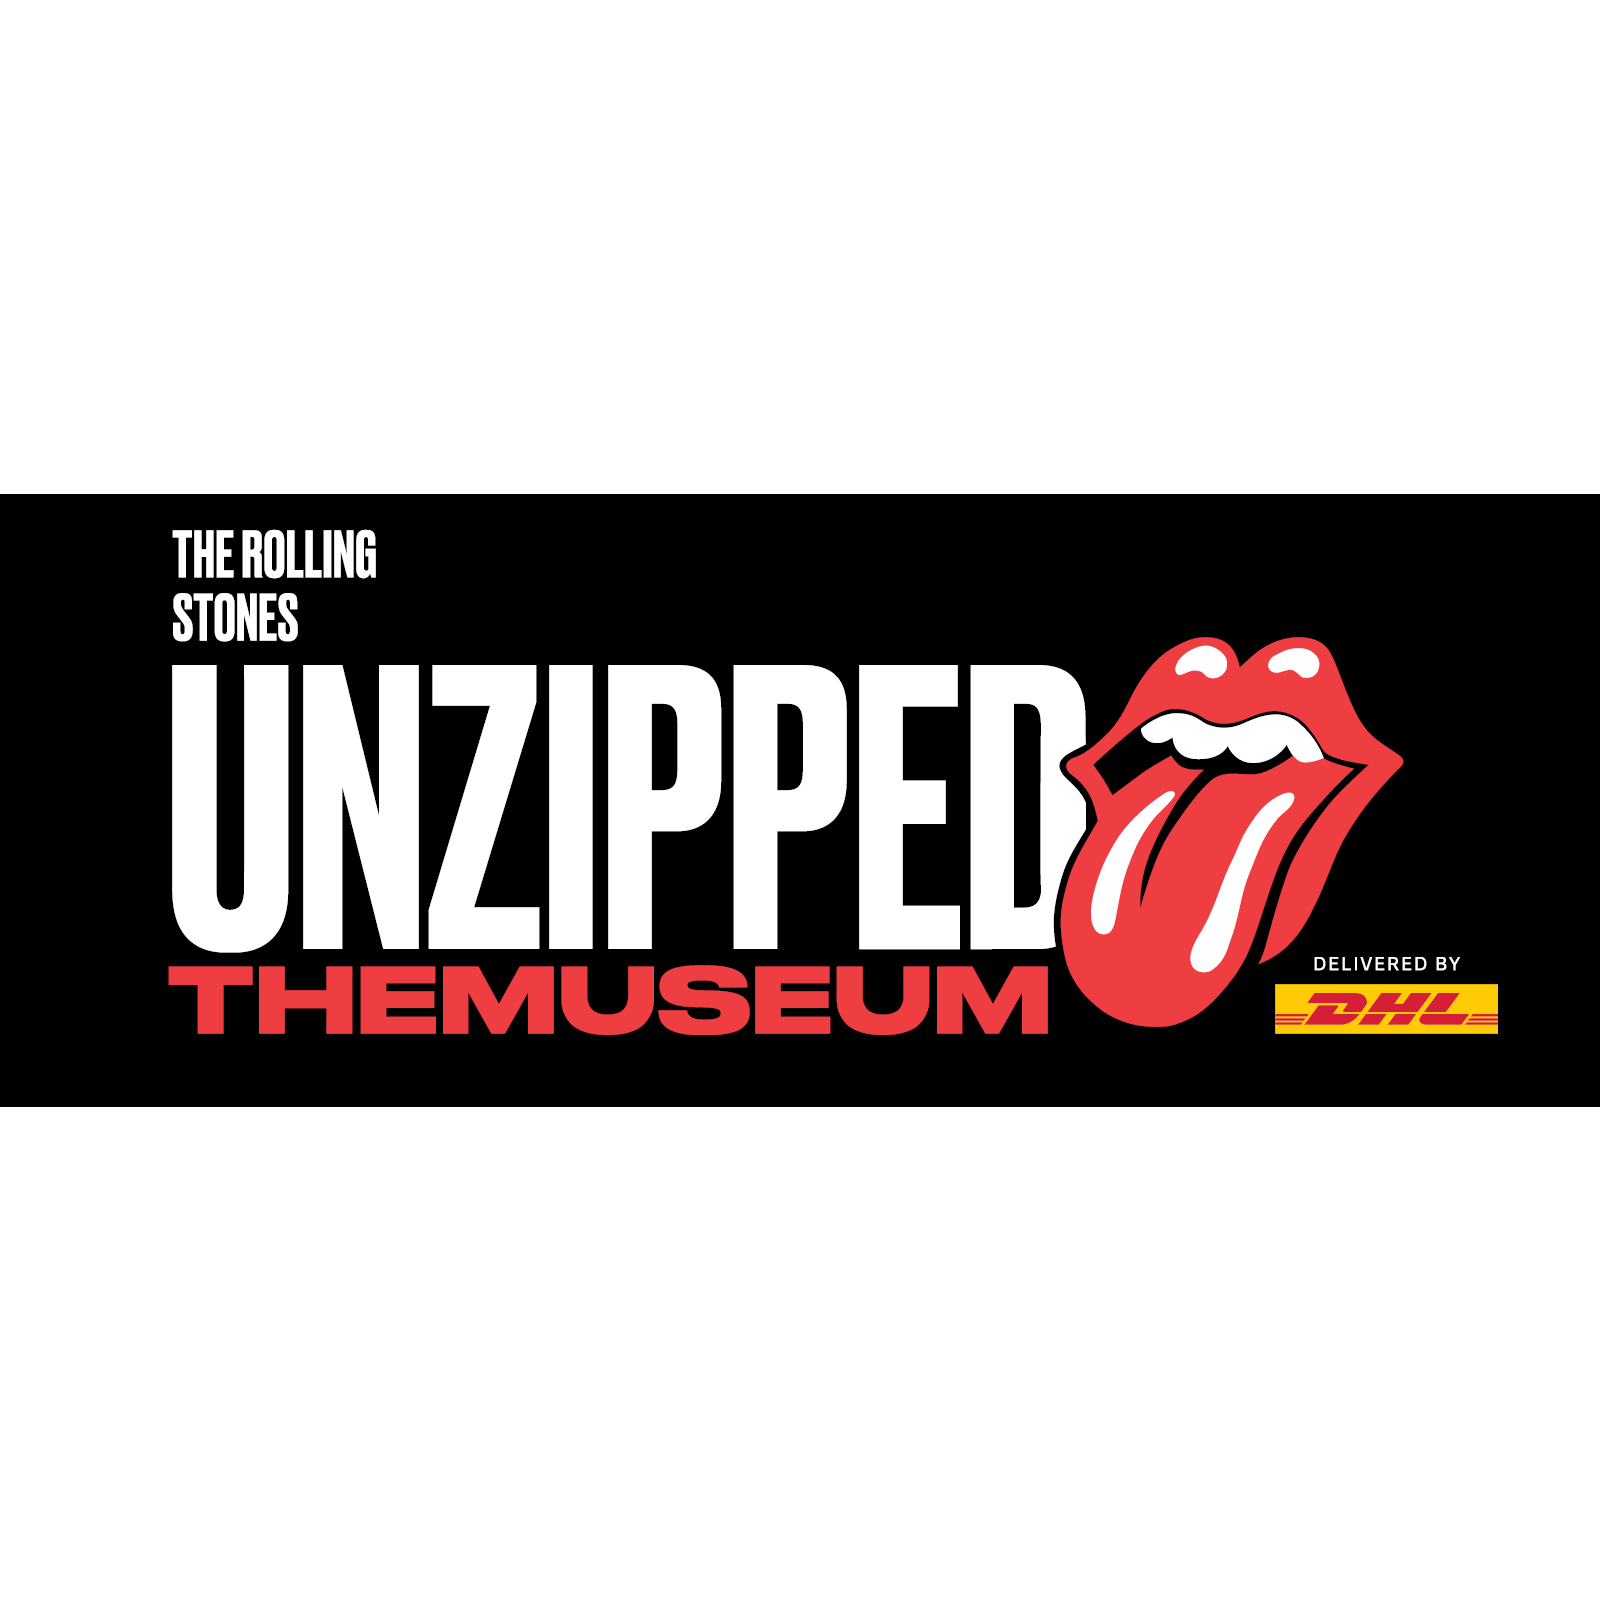 The Rolling Stones. unzipped